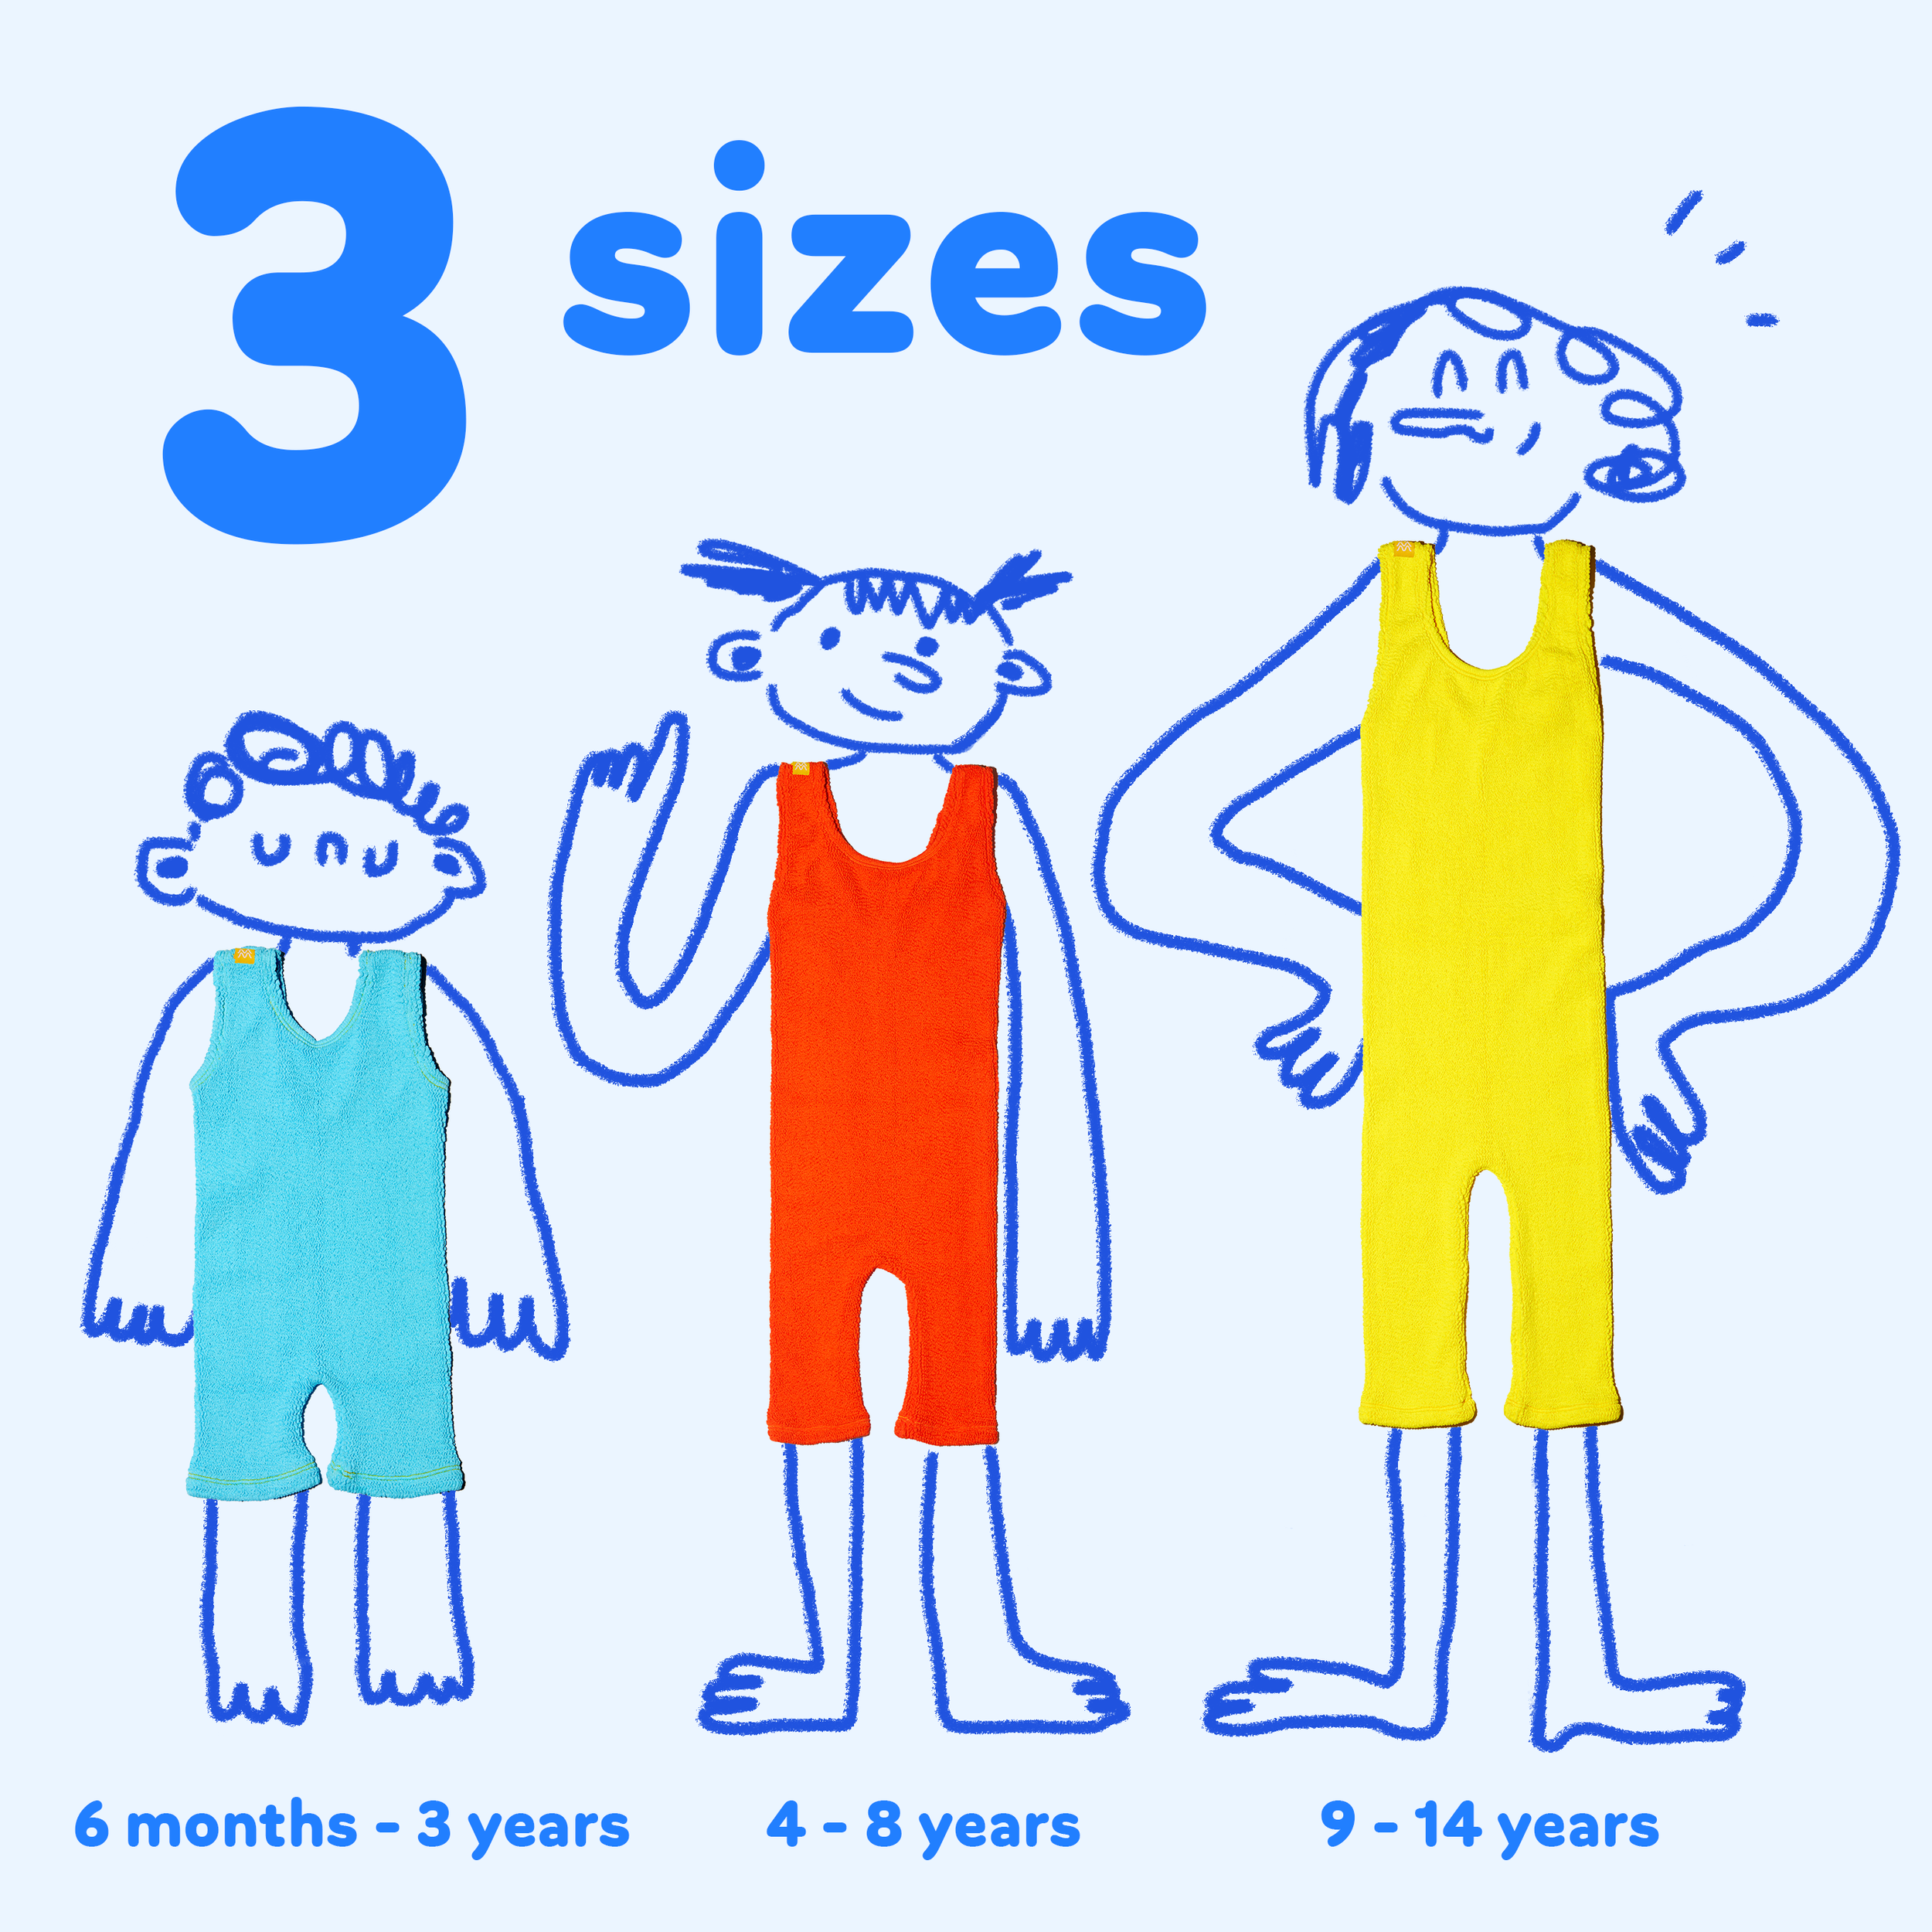 3_sizes1.png